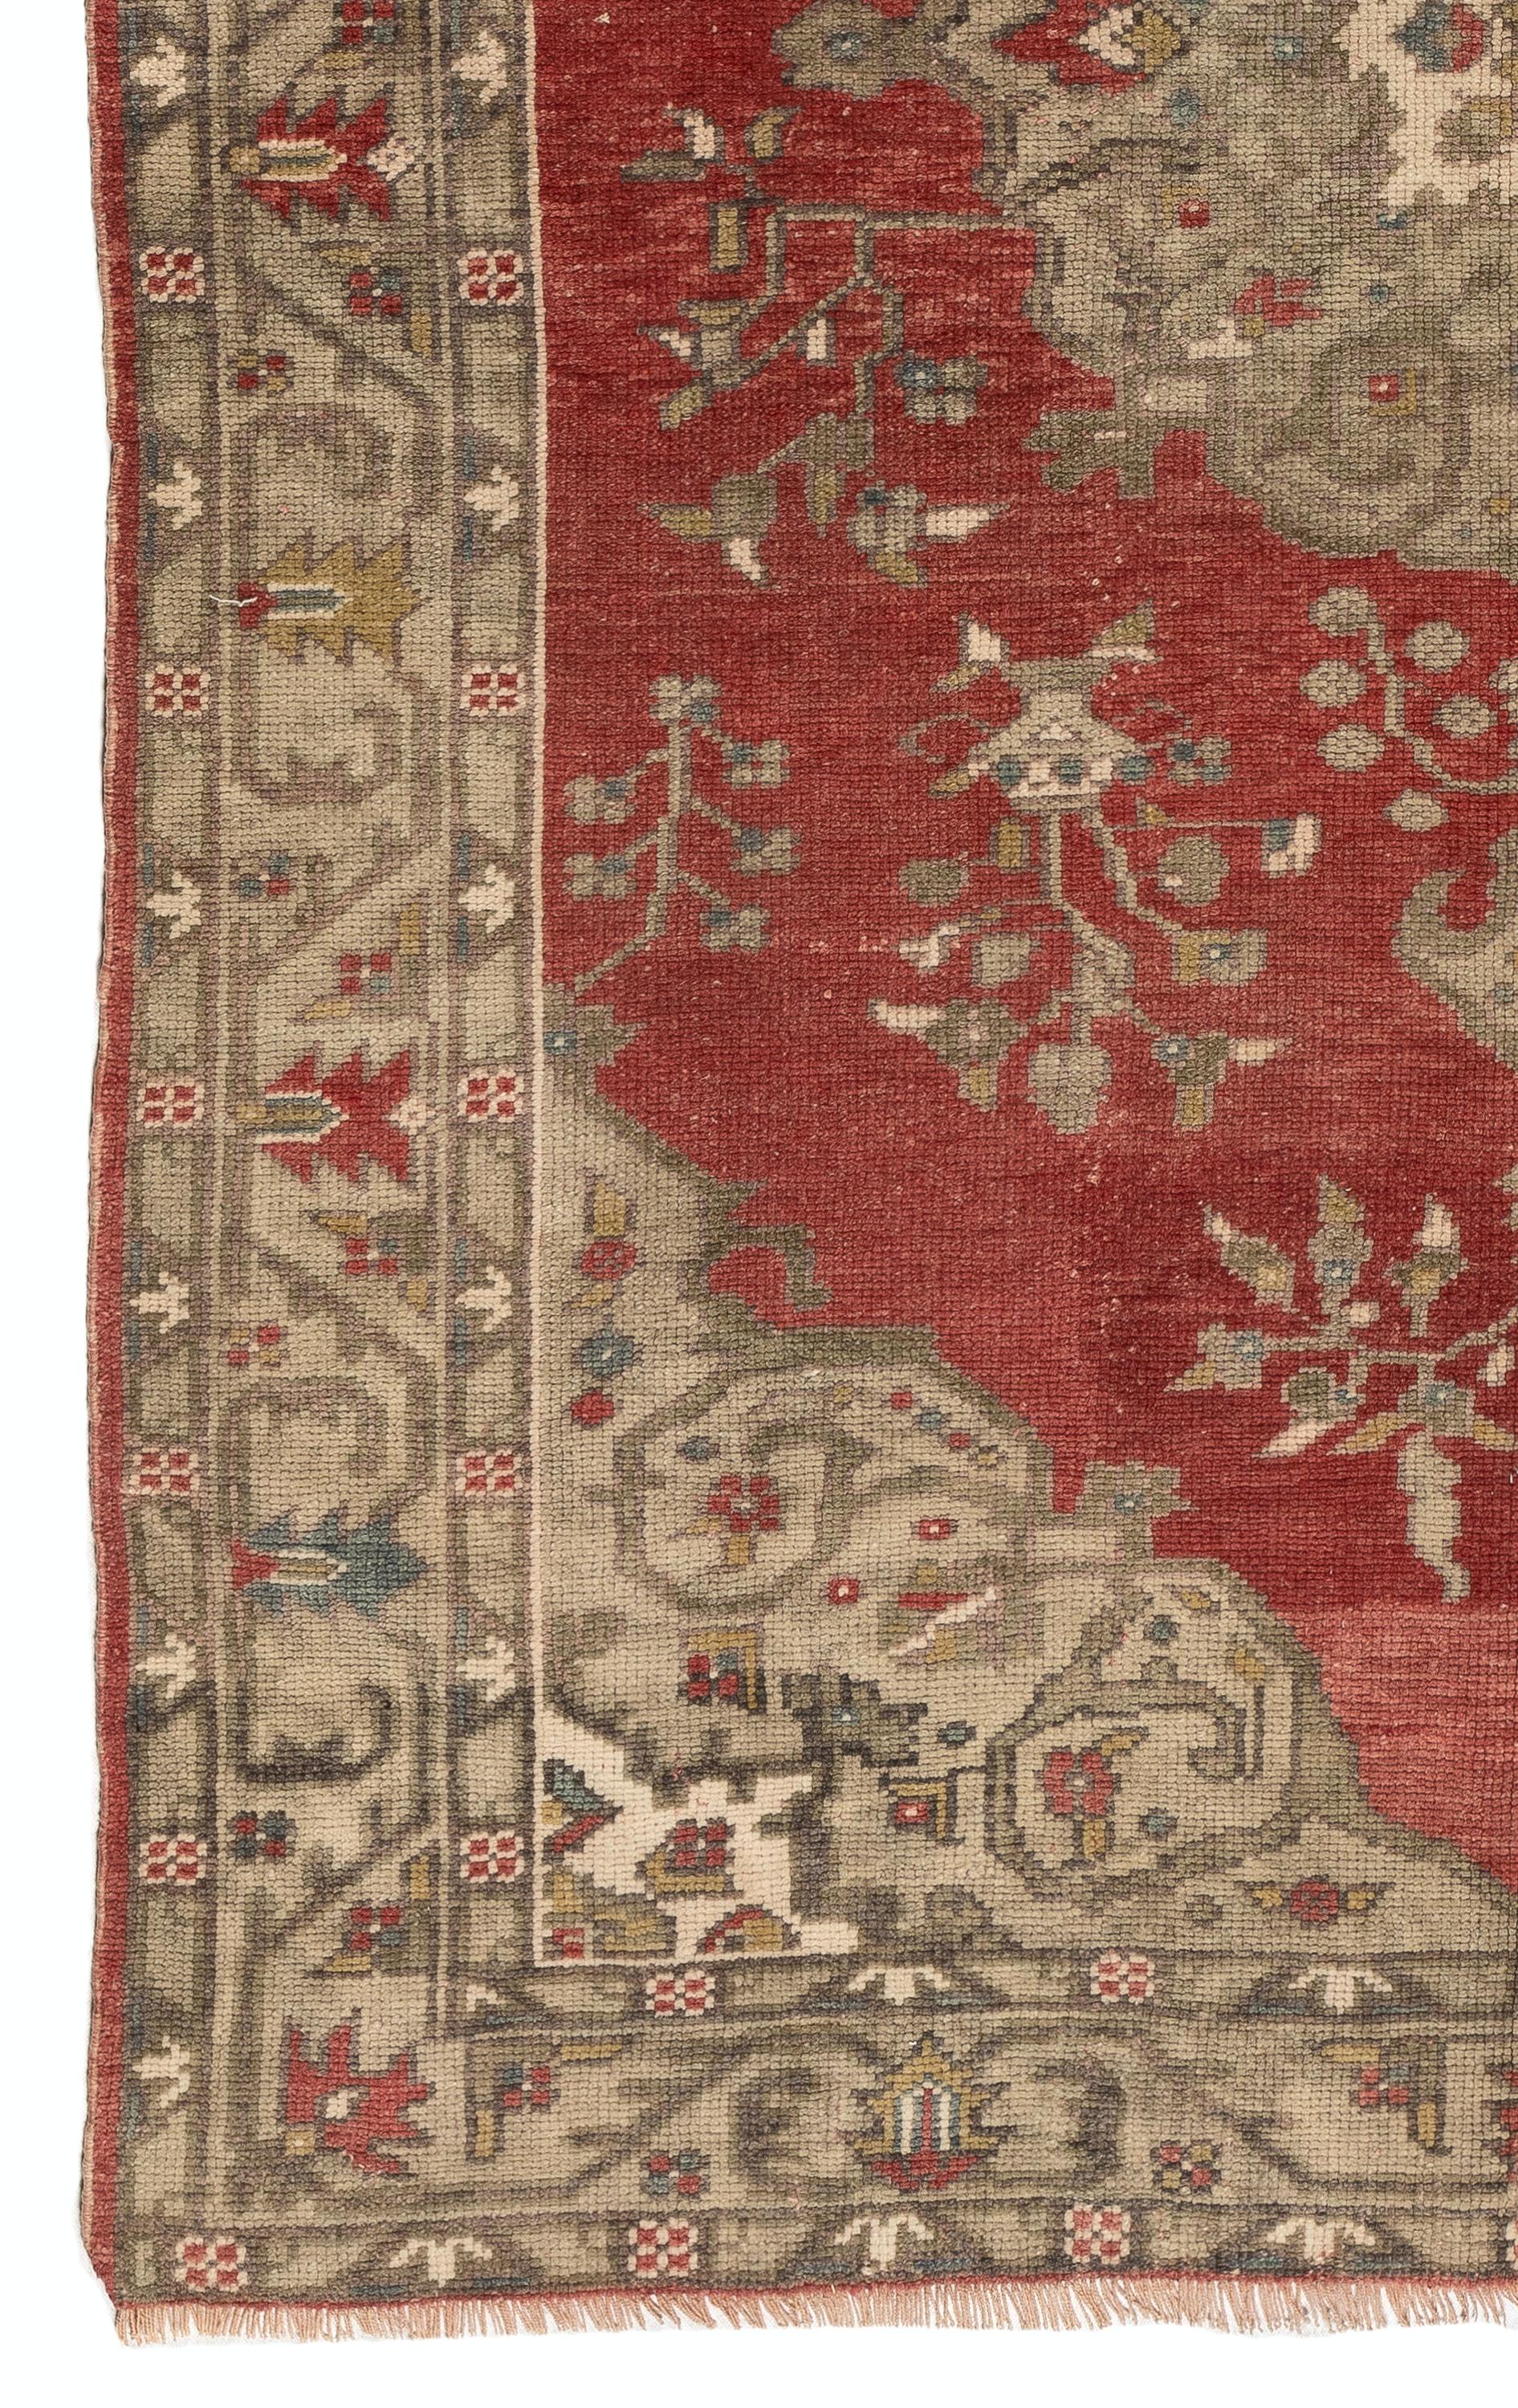 5.5x8.6 Ft Antique Turkish Bergama Rug, circa 1920, One-of-a-kind Carpet In Good Condition For Sale In Philadelphia, PA